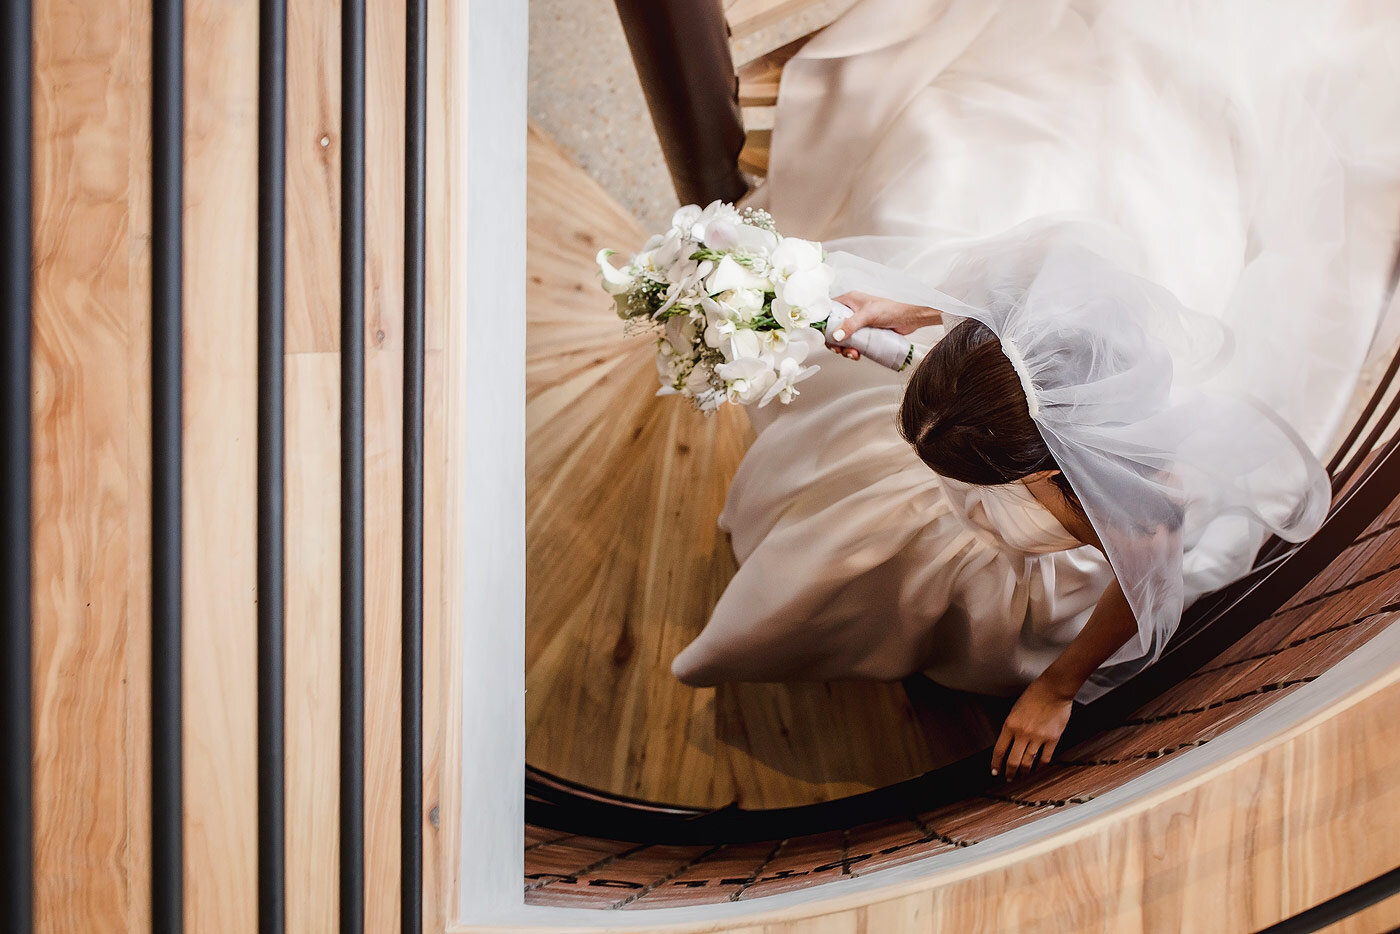 Bride walking down the stairs with a flowing veil.